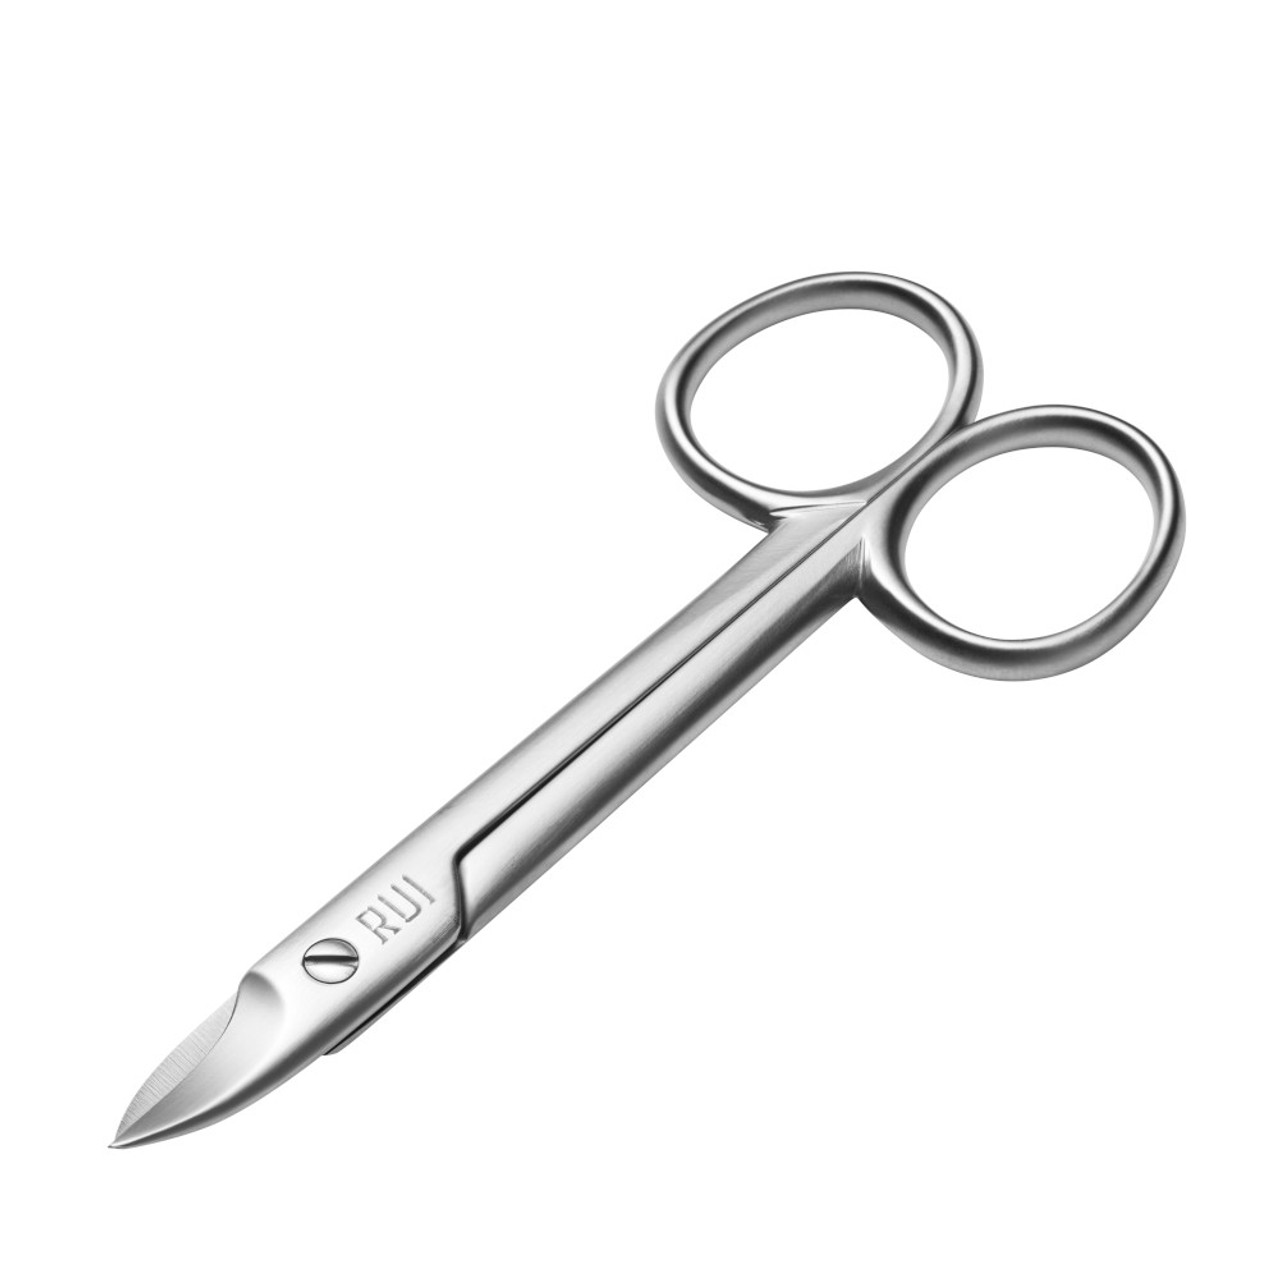 Toenail Scissors with for Extra Long Handle Special Stainless Steel An –  TweezerCo